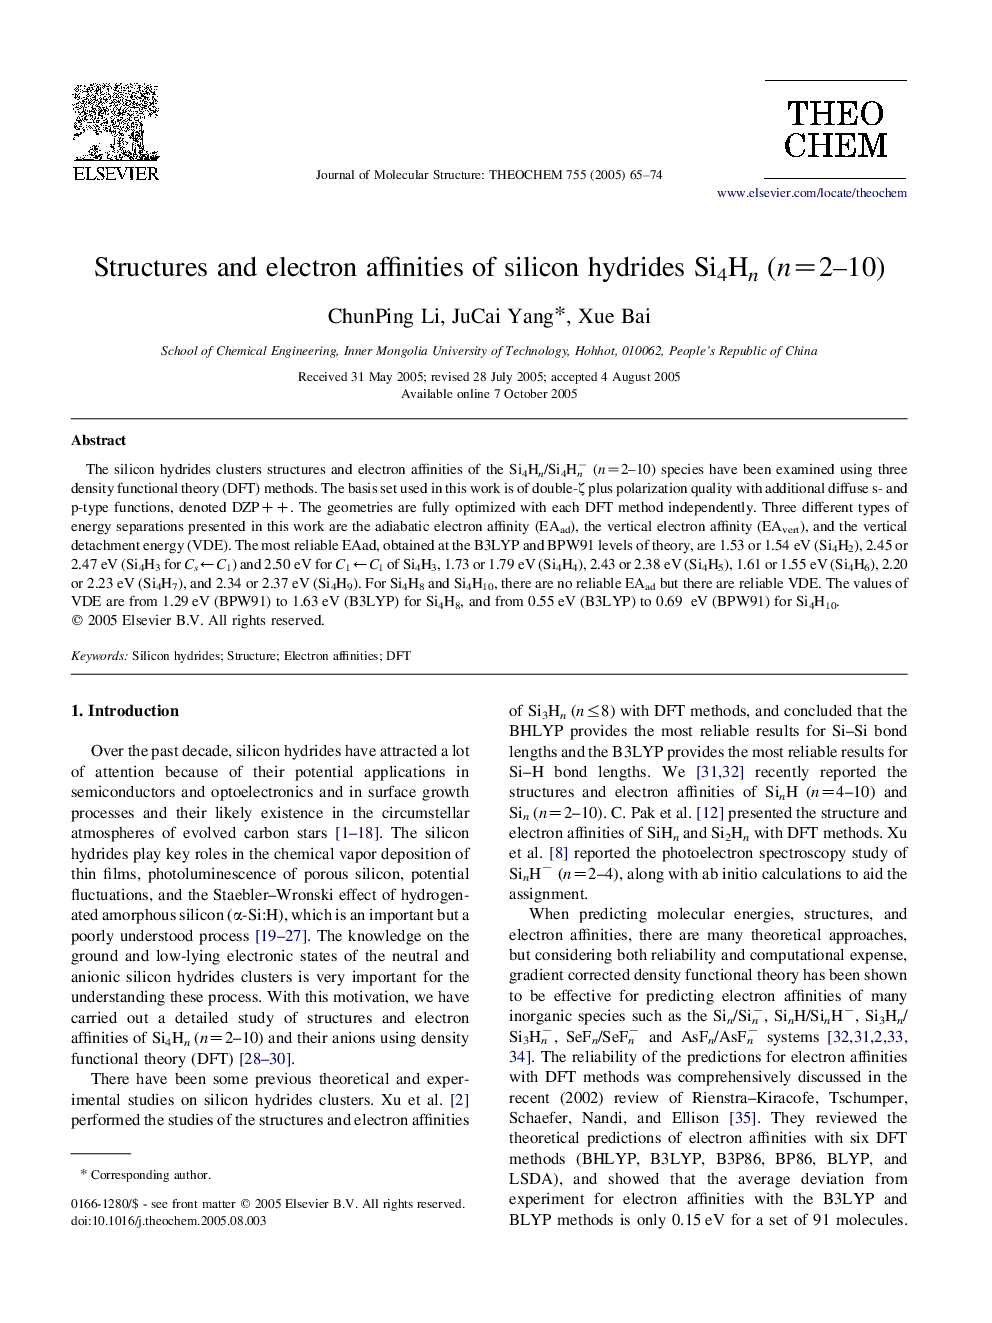 Structures and electron affinities of silicon hydrides Si4Hn (n=2-10)